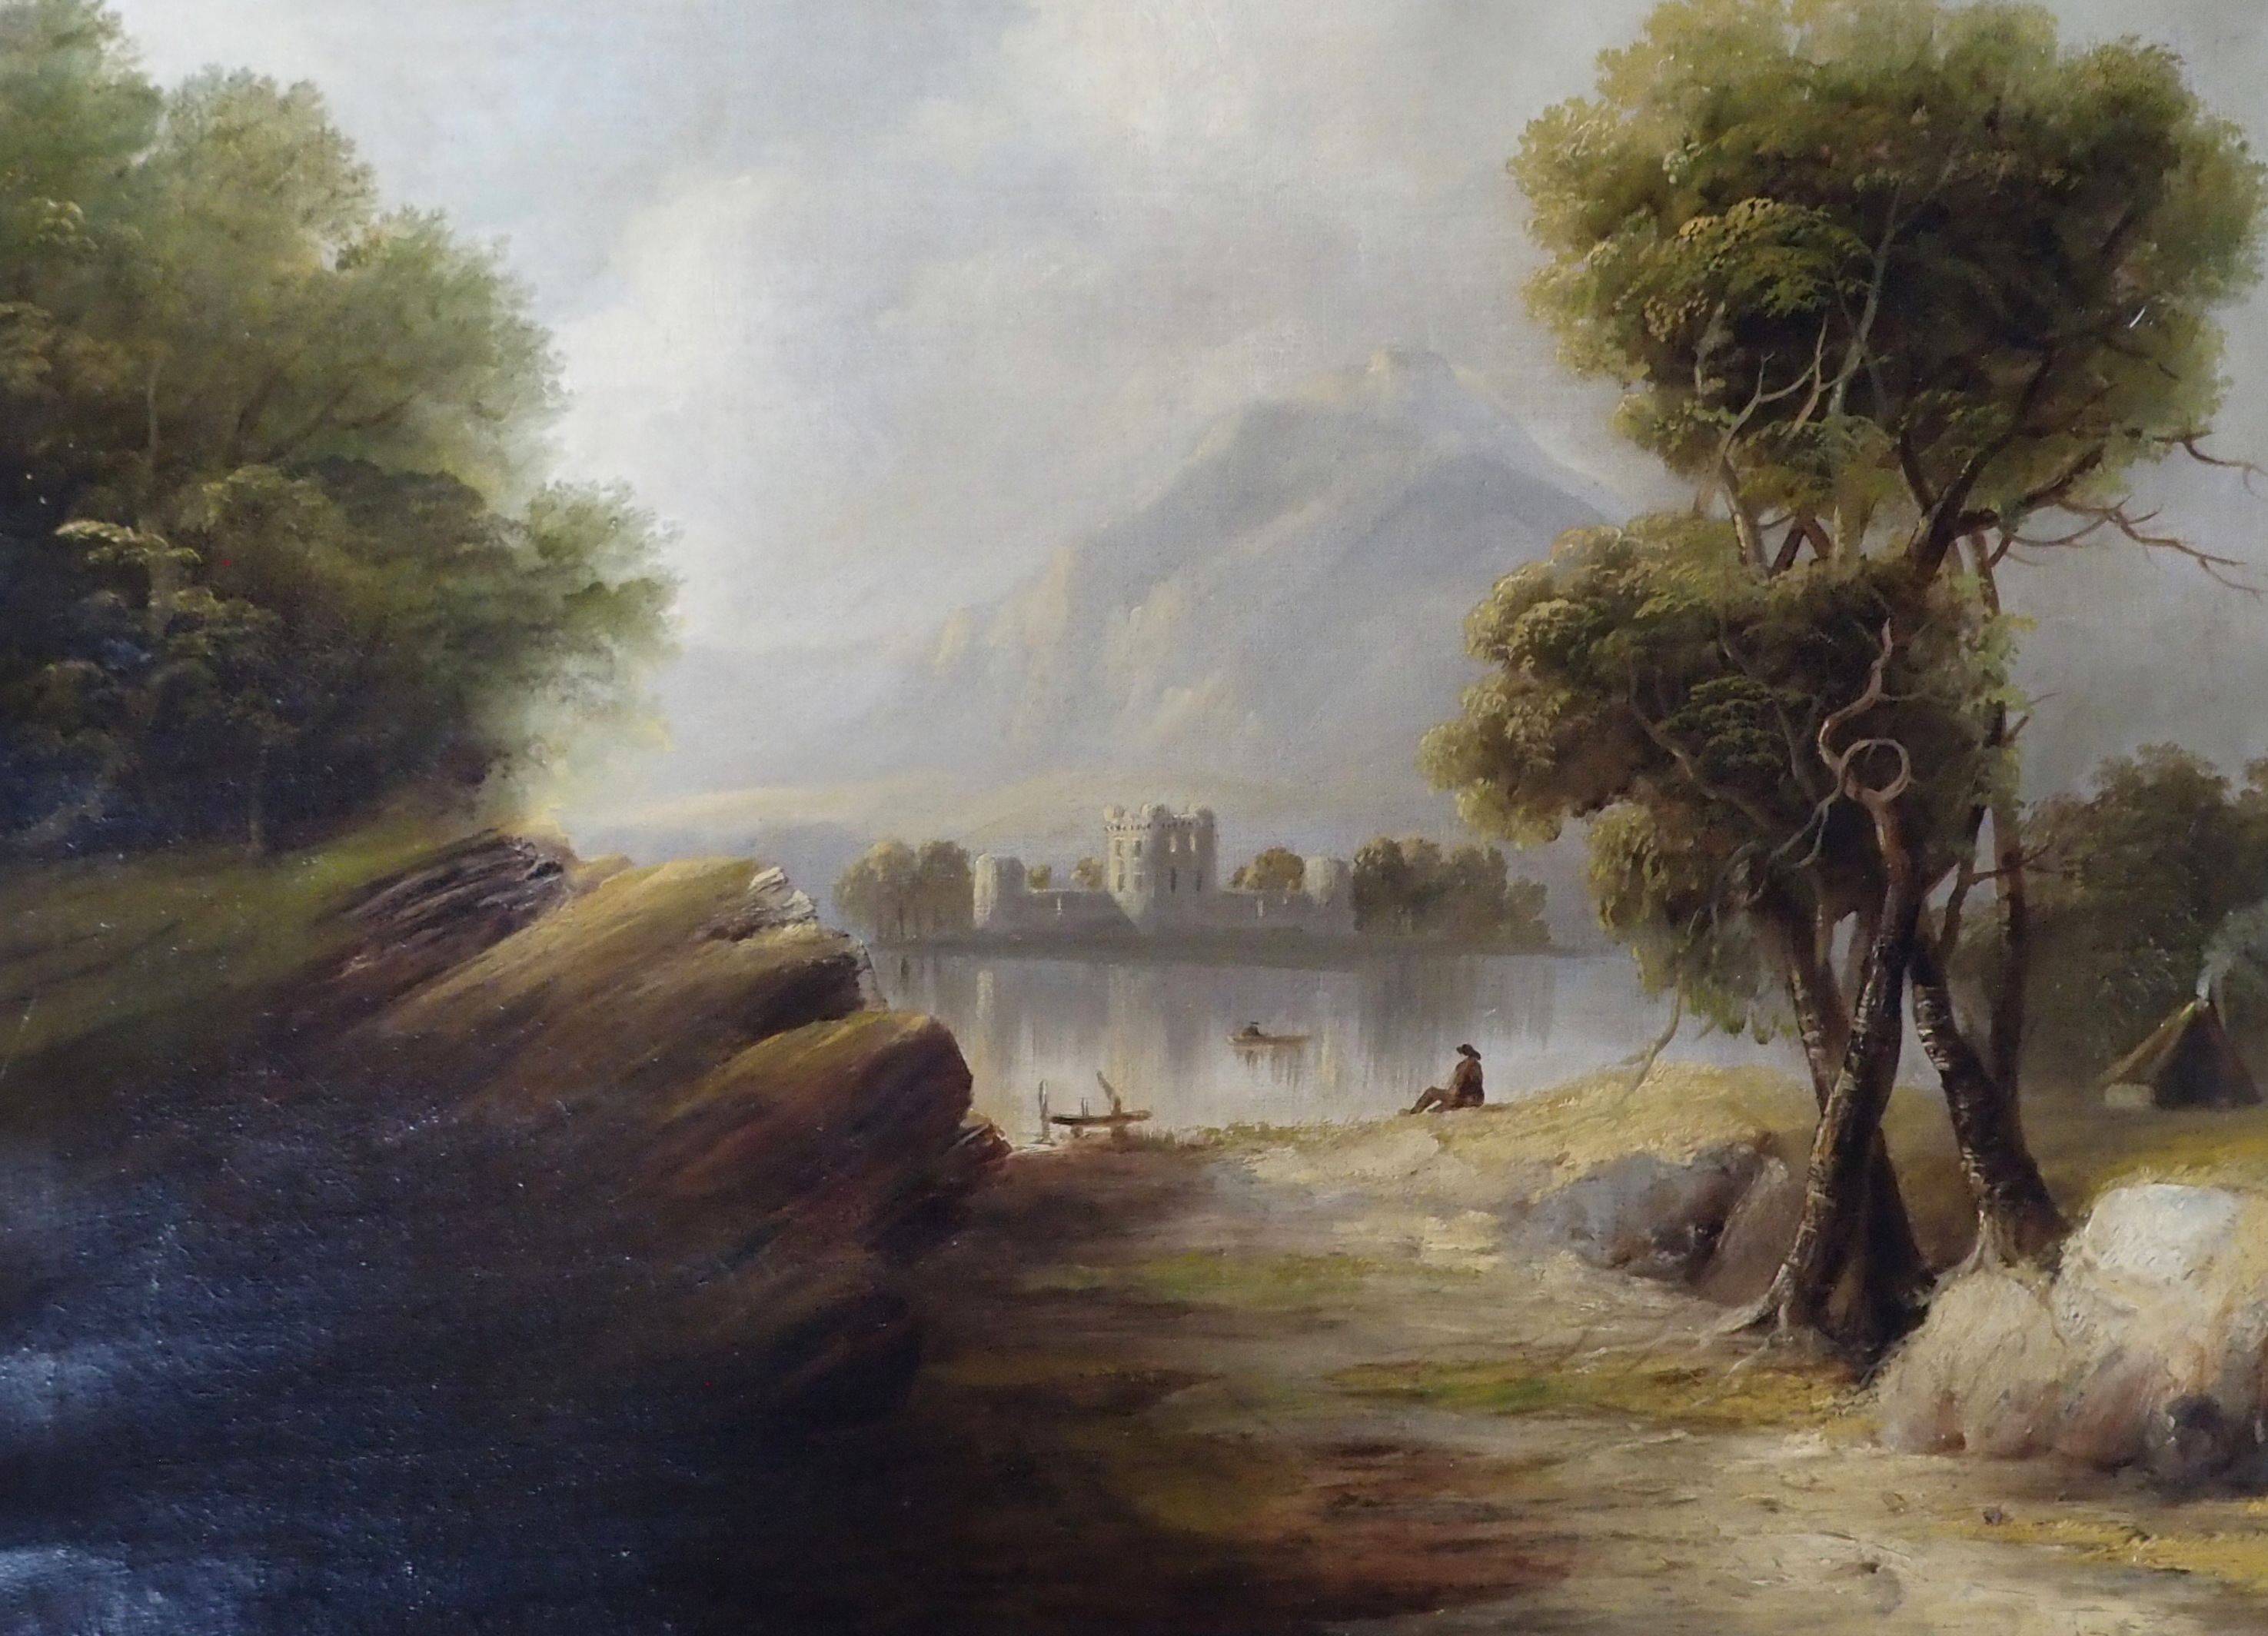 SCOTTISH SCHOOL (19TH CENTURY) BY THE BANKS OF A HIGHLAND LOCH Oil on canvas, 46 x 61cm (18 x